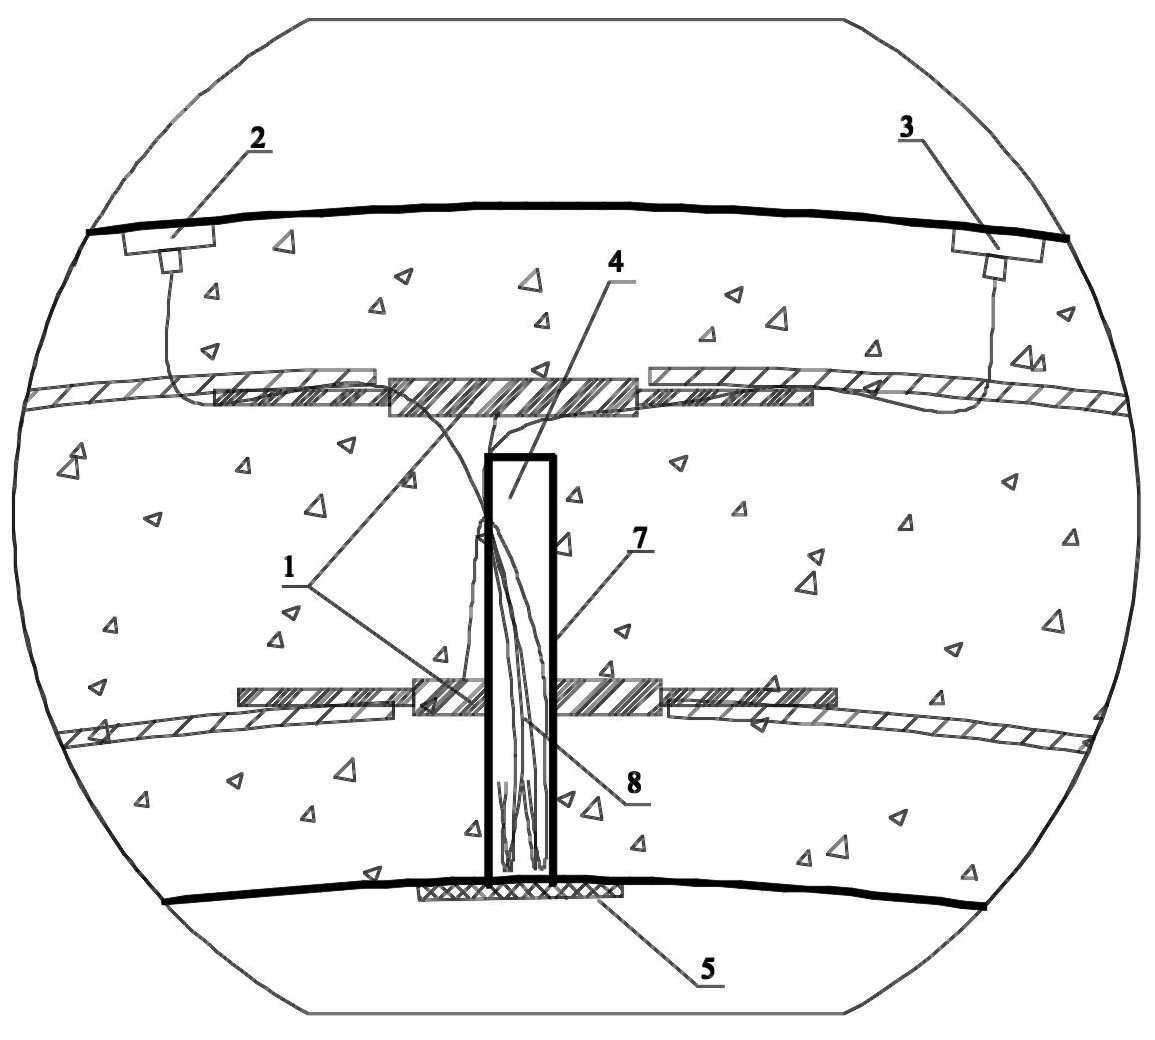 Waterproofing method for stress monitoring cable joints for reinforced concrete segments